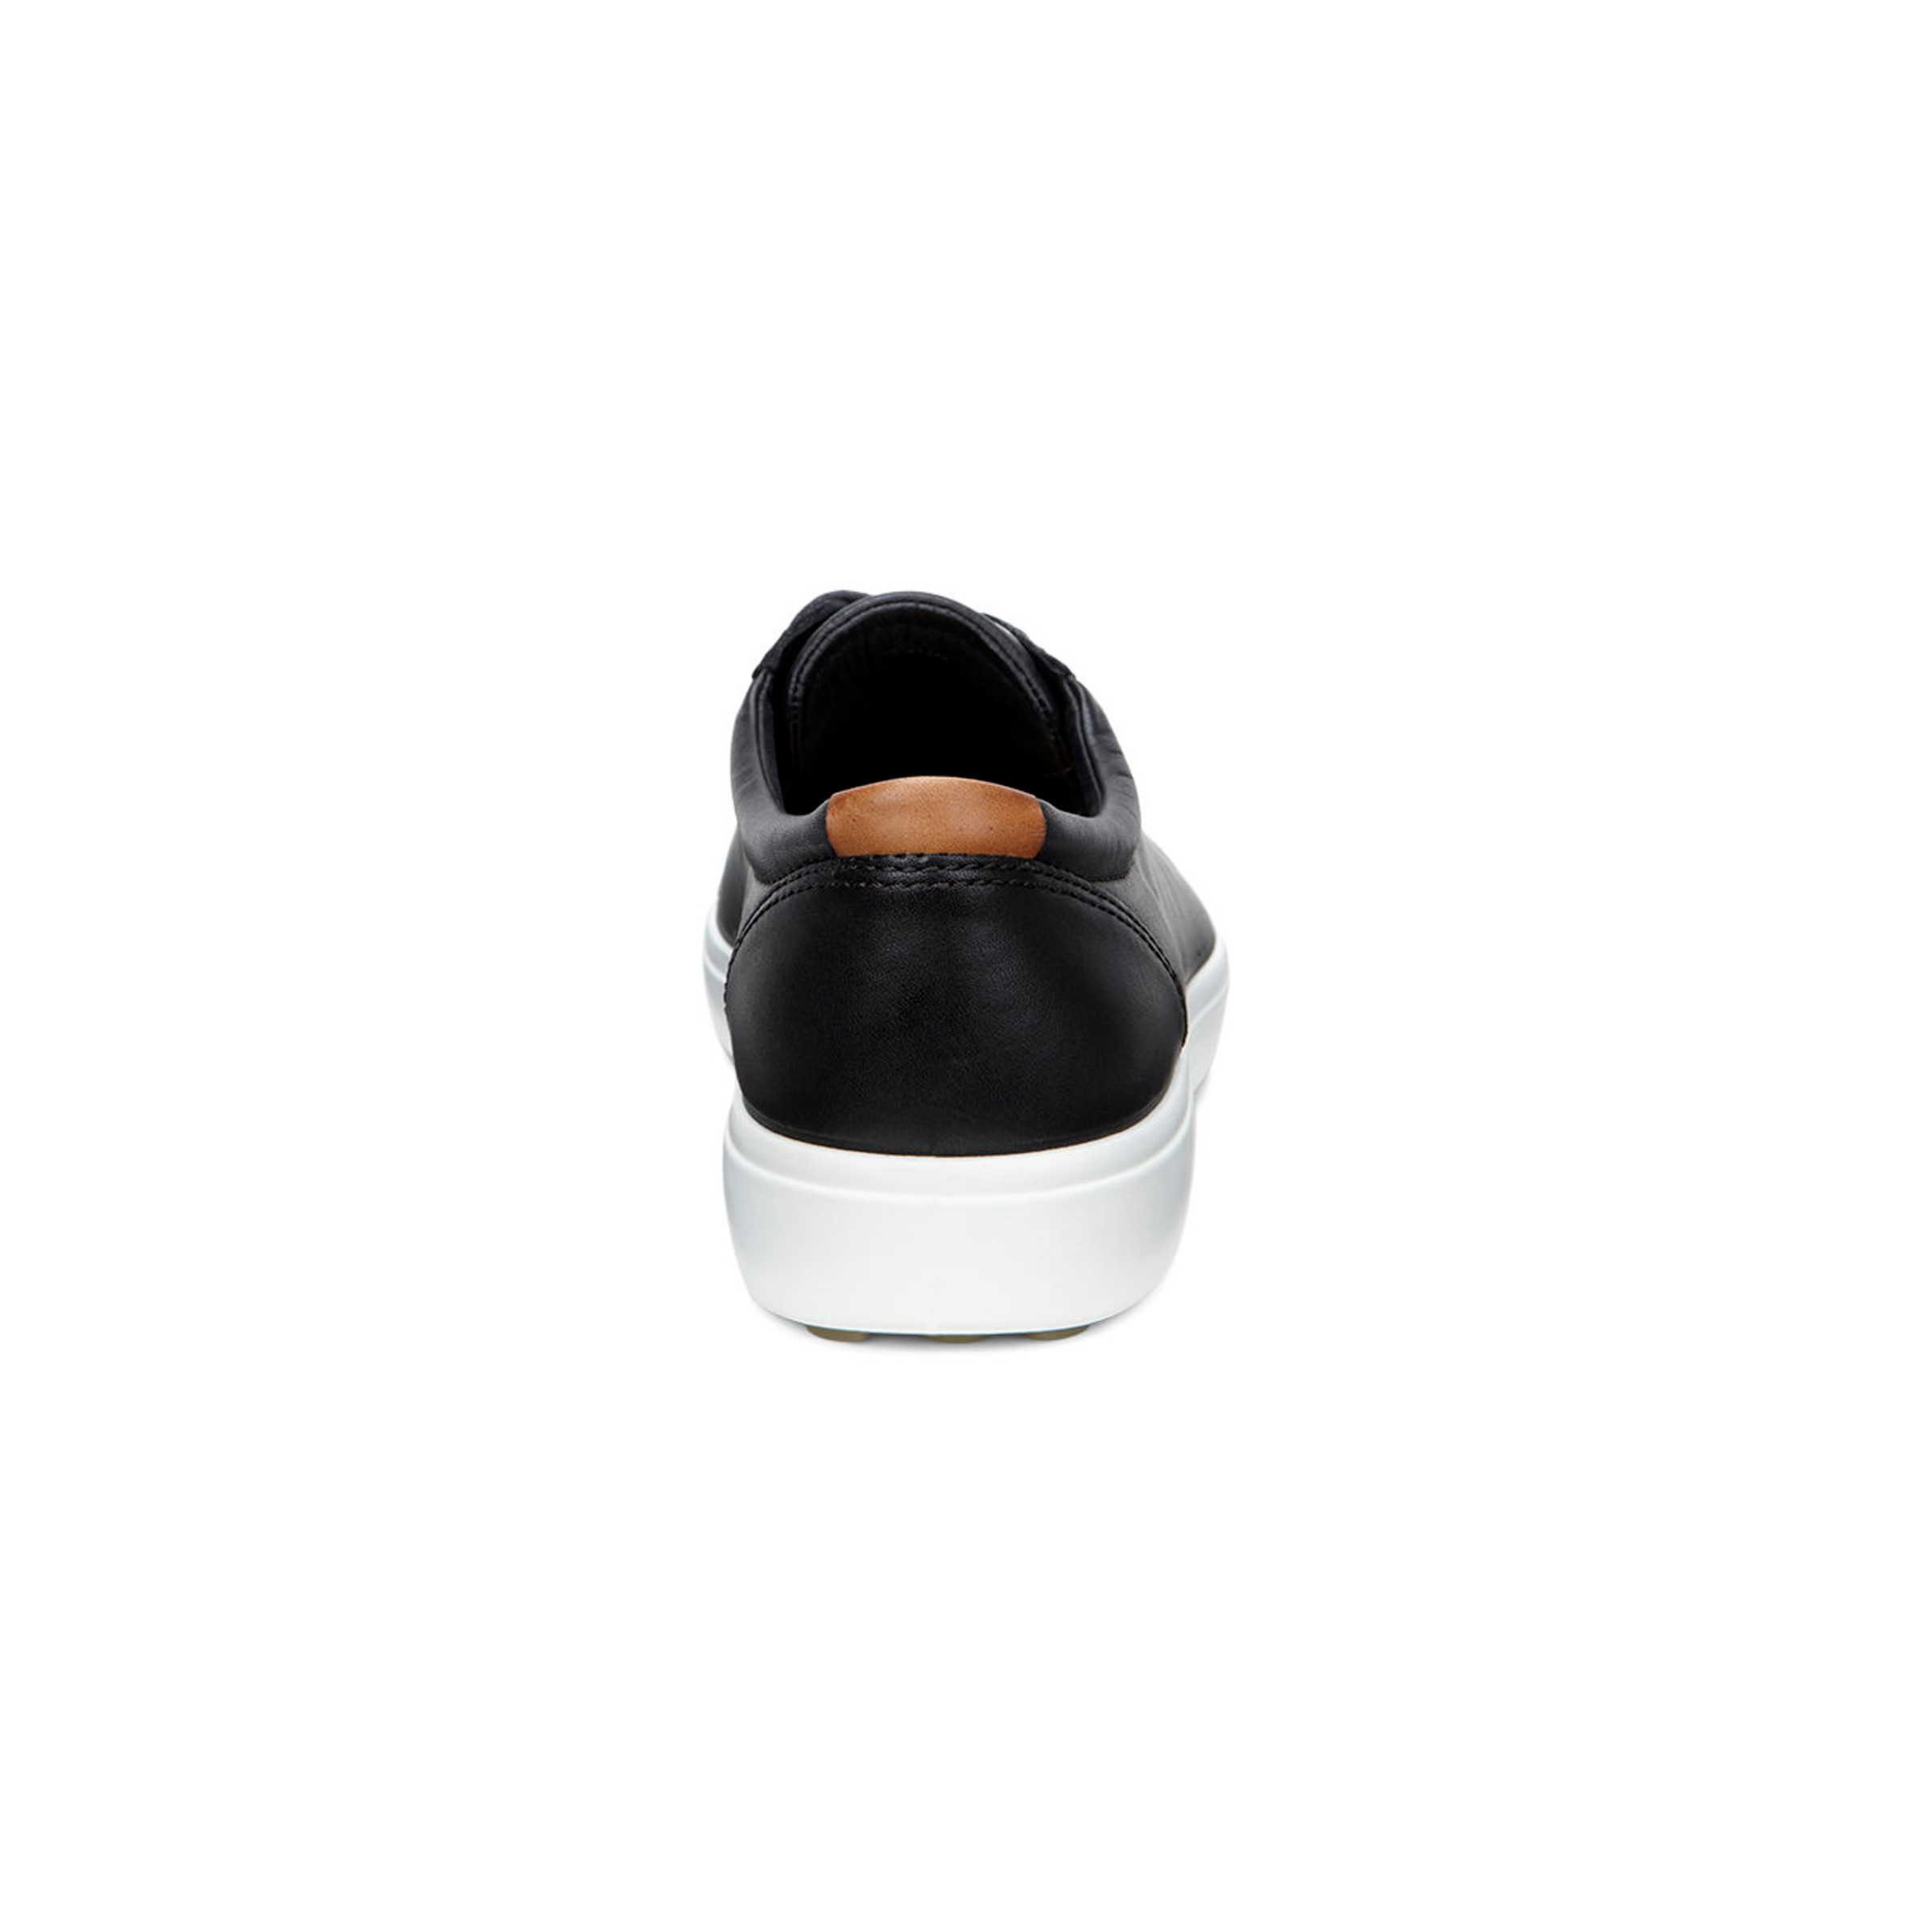 ecco soft 7 quilted sneaker